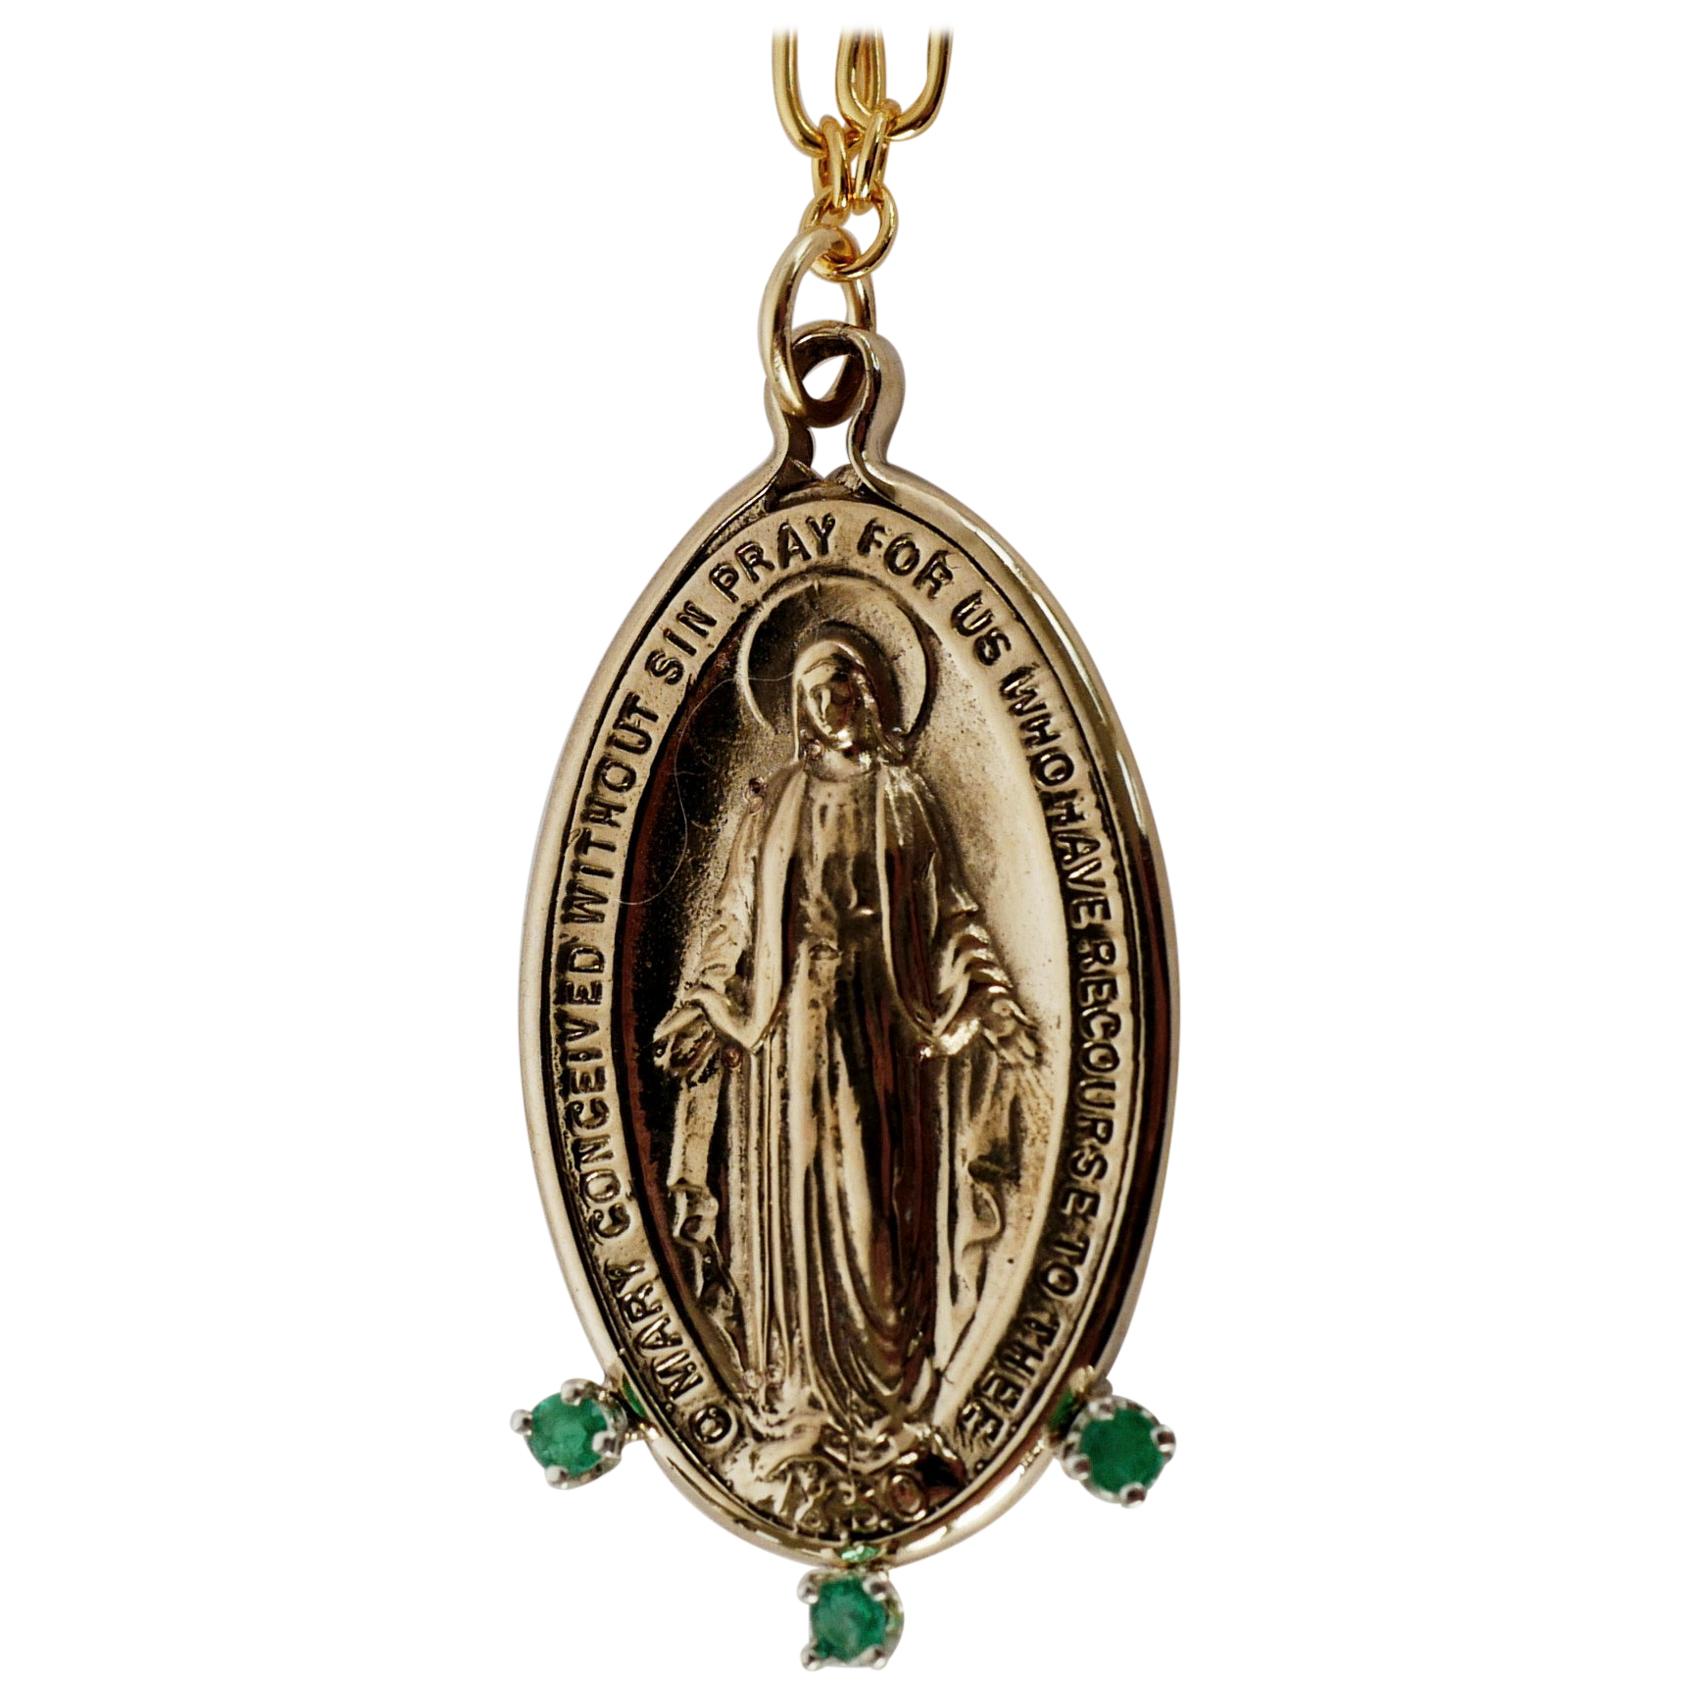 Emerald Virgin Mary Oval Medal Chain Necklace Gold Filled Chain J Dauphin For Sale